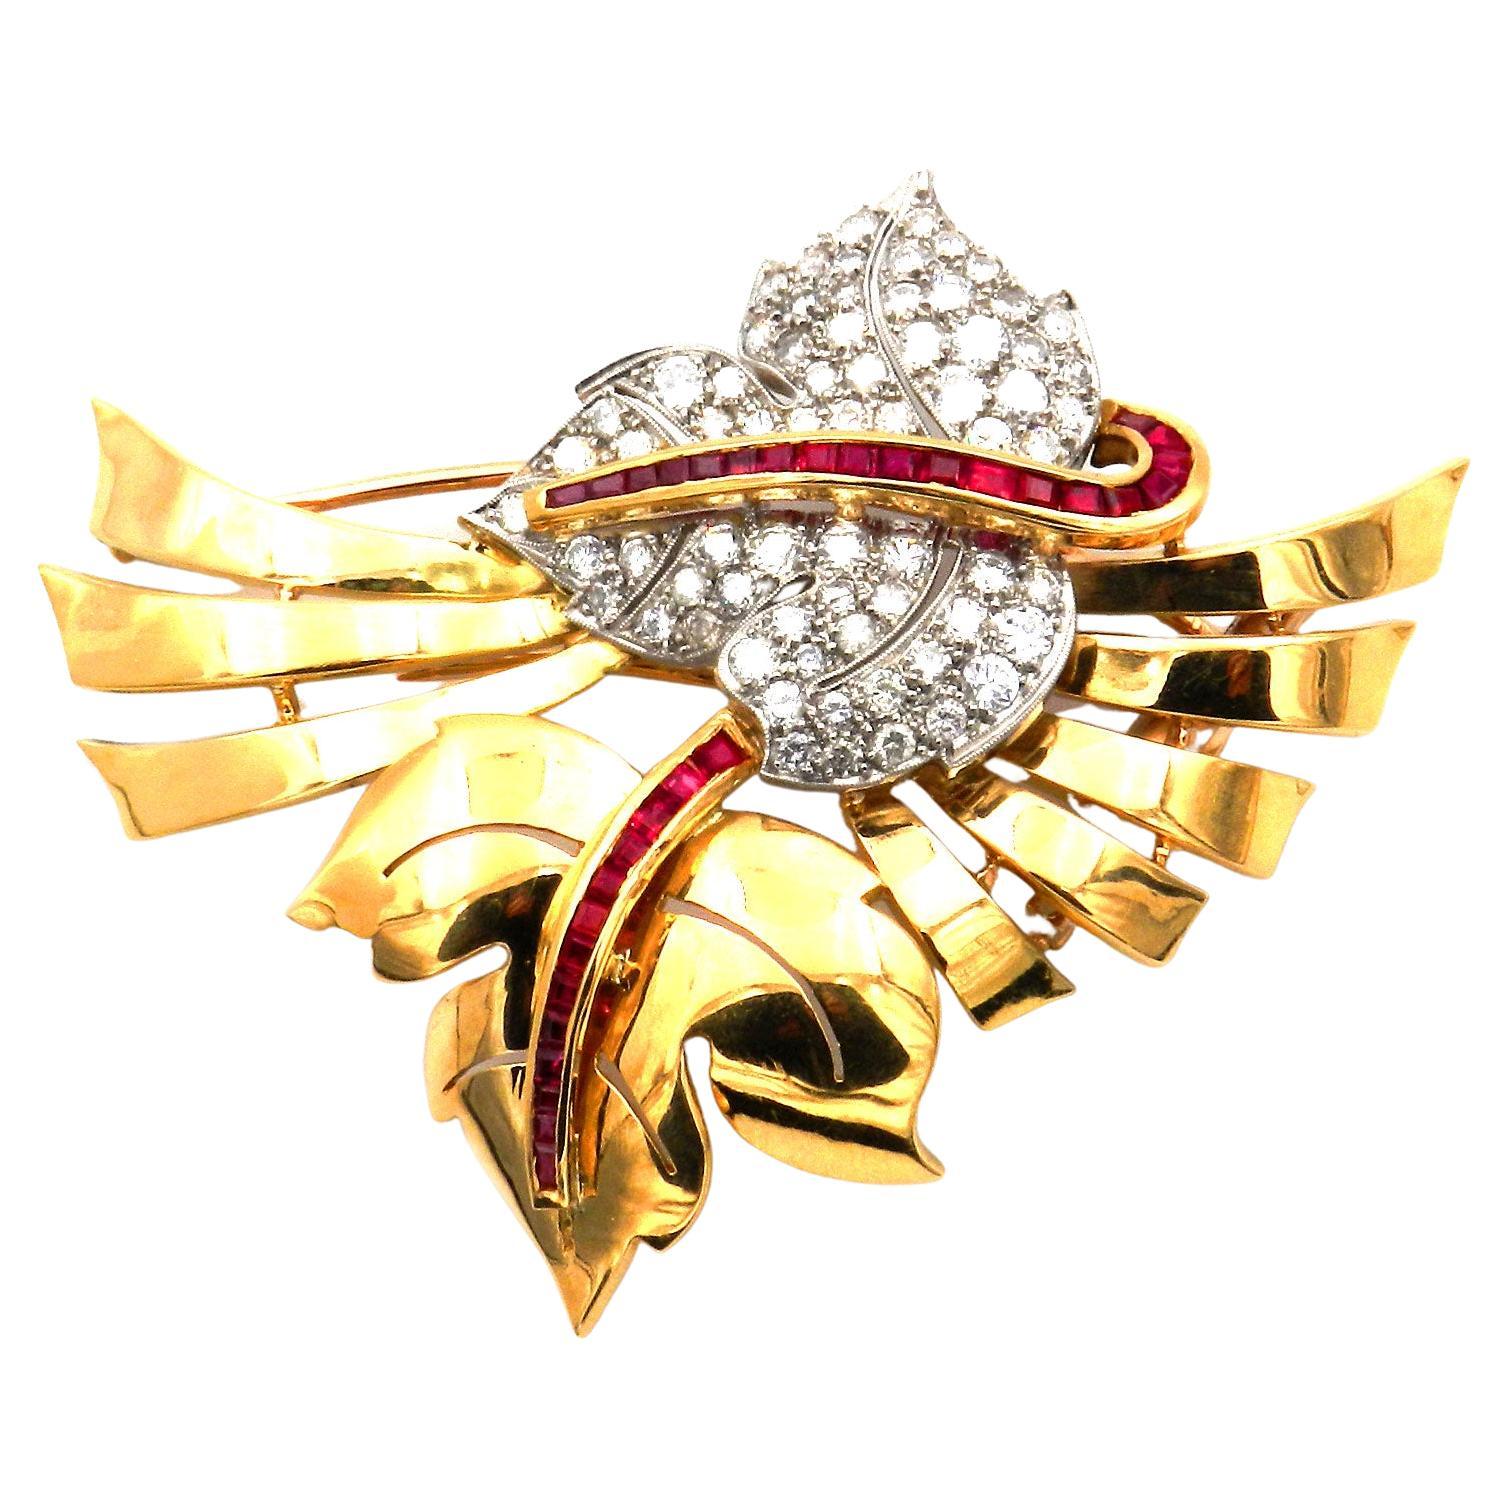 Retro 2.1ct Diamond Ruby Leaf Brooch in 18K Gold and Platinum, circa 1945 For Sale